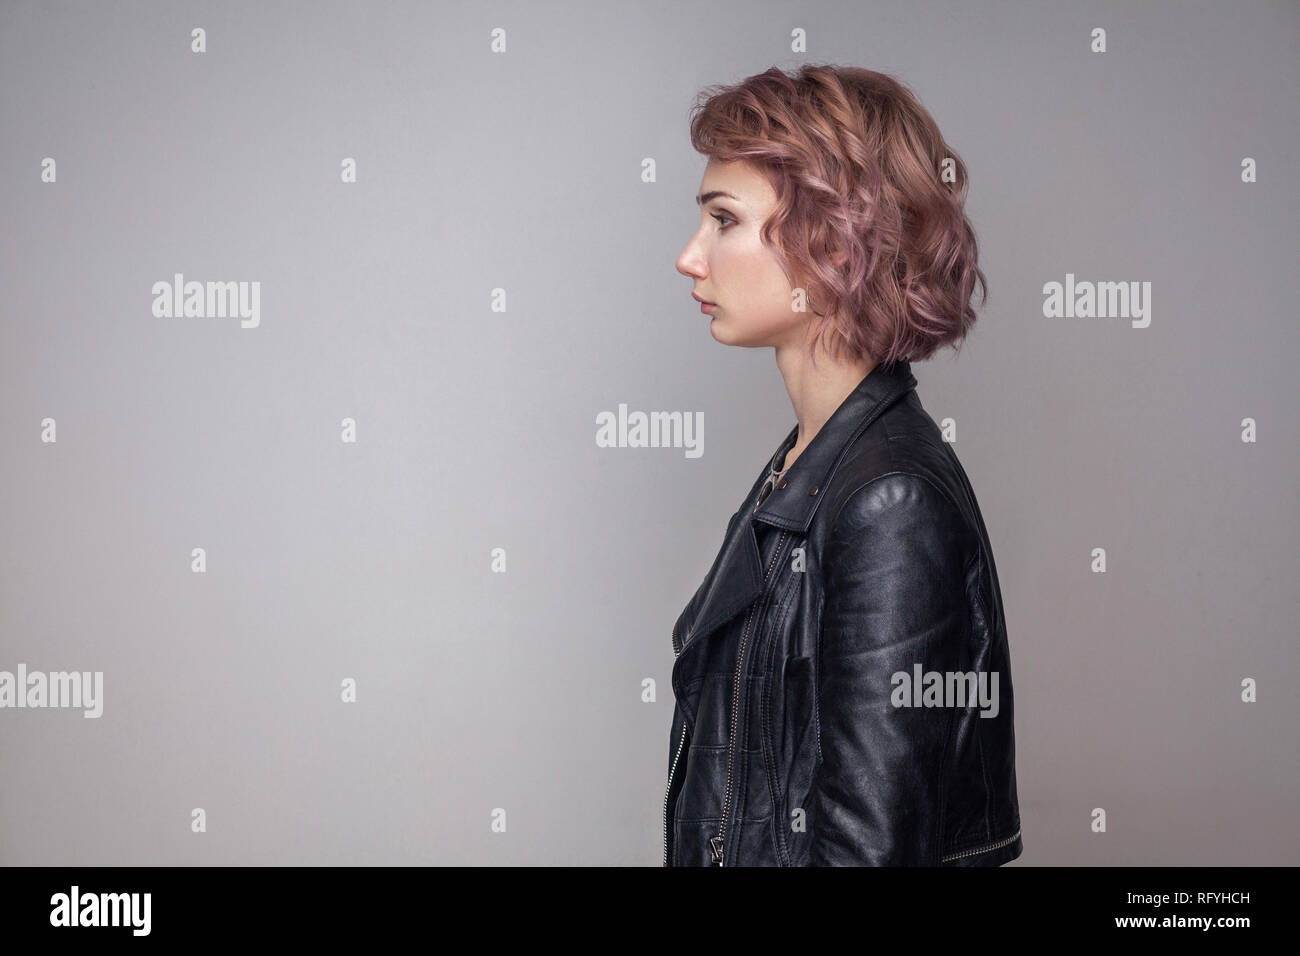 Profile side view portrait of serious beautiful girl with short hairstyle and makeup in casual style black leather jacket standing and looking aside.  Stock Photo